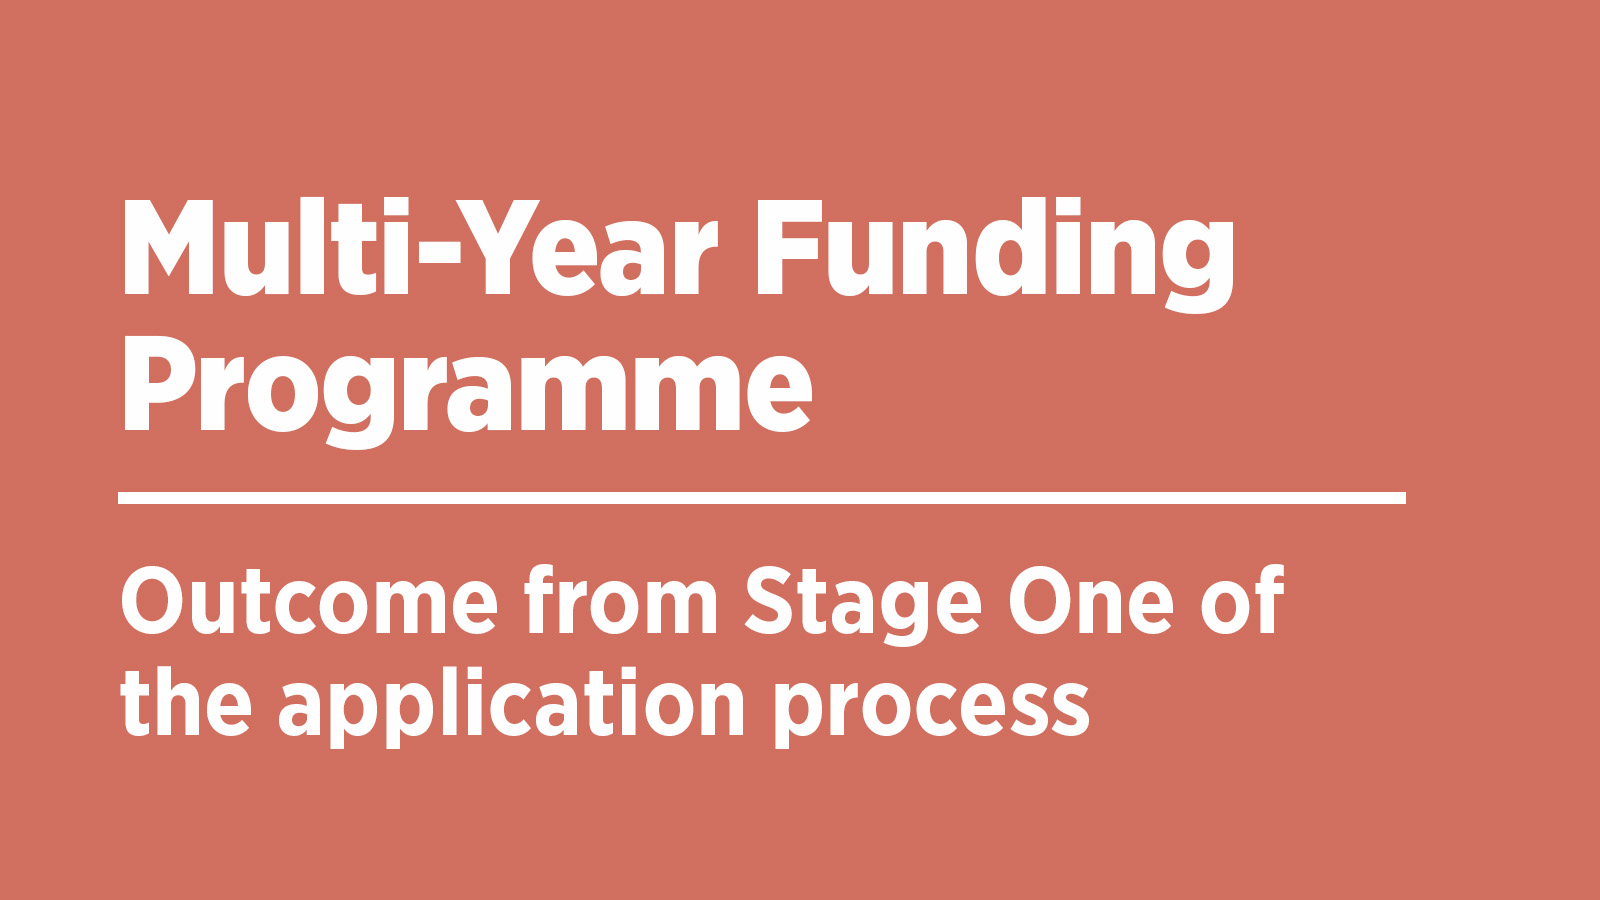 Multi-Year Funding Programme. Outcome of Stage One of the application process.